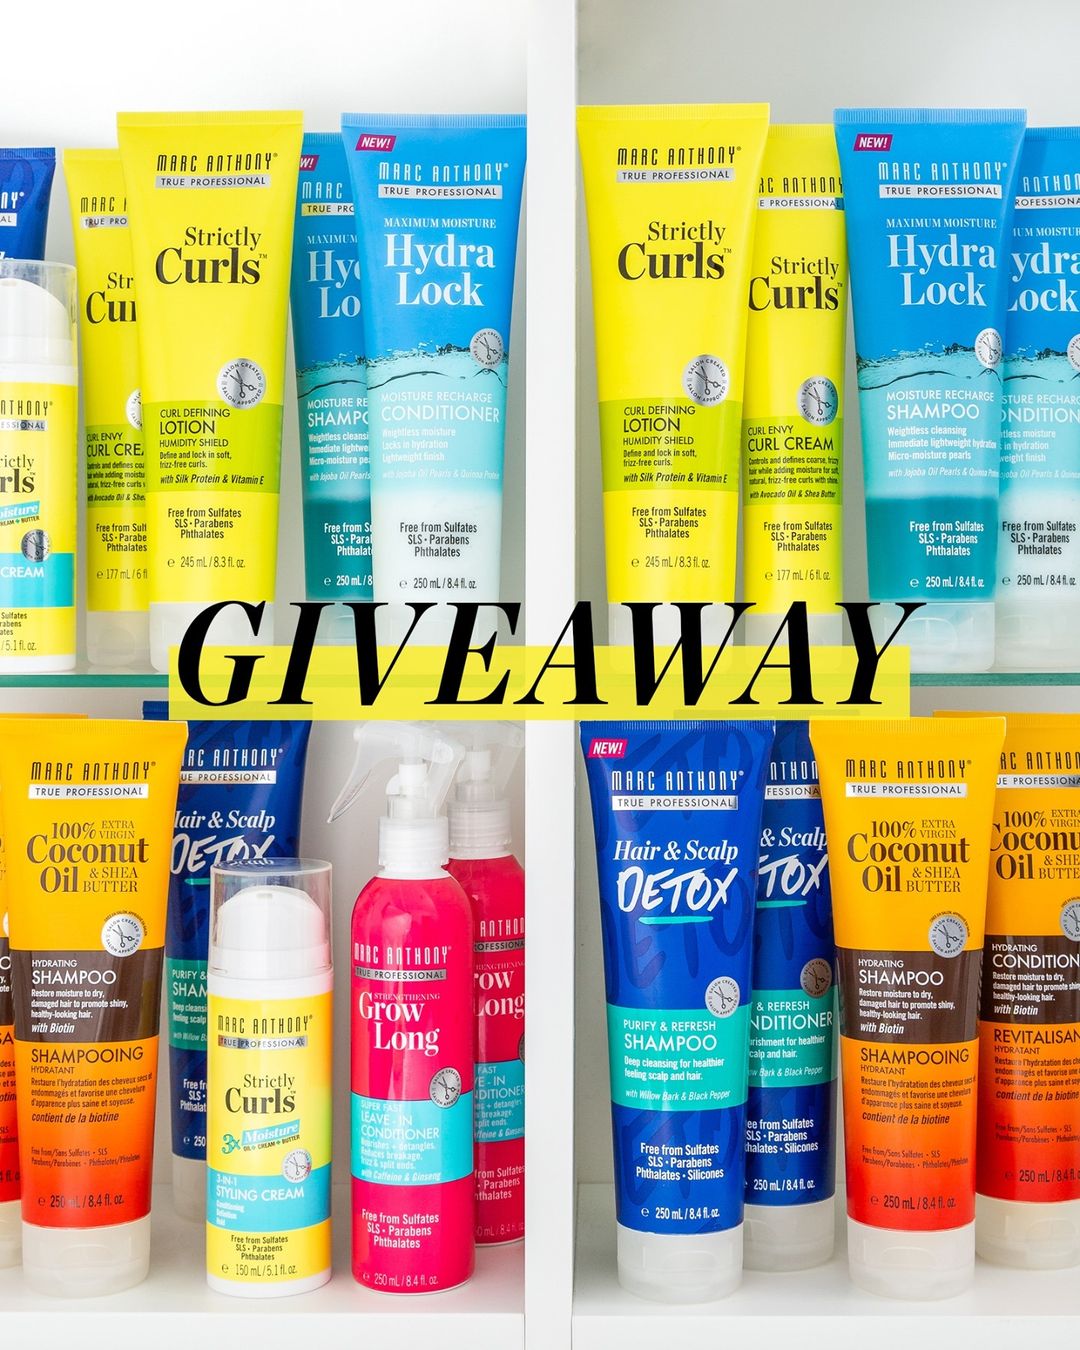 Marc Anthony Hair Care - 🌟GIVEAWAY ALERT🌟
#HappyThanksgiving to our fellow Canadians 🇨🇦 We are so thankful to have all of you be a part of our community❤️ That's why we're giving away all the products...